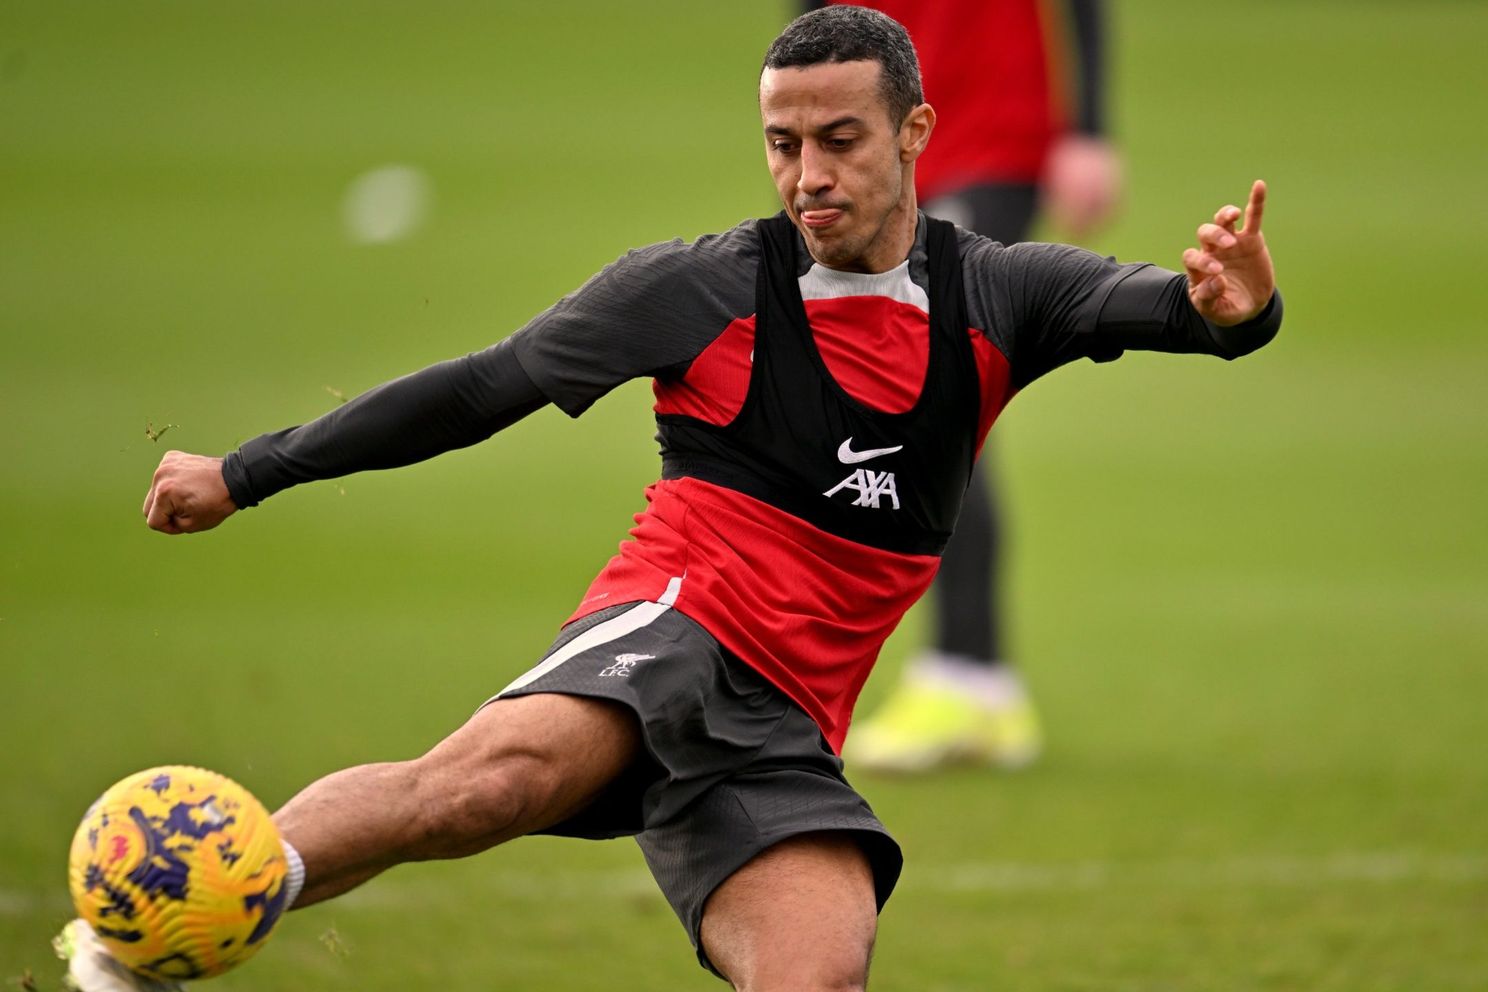 Initial Signs Point to "Pretty Serious" Injury Potentially Ending Thiago Alcantara's Liverpool Career